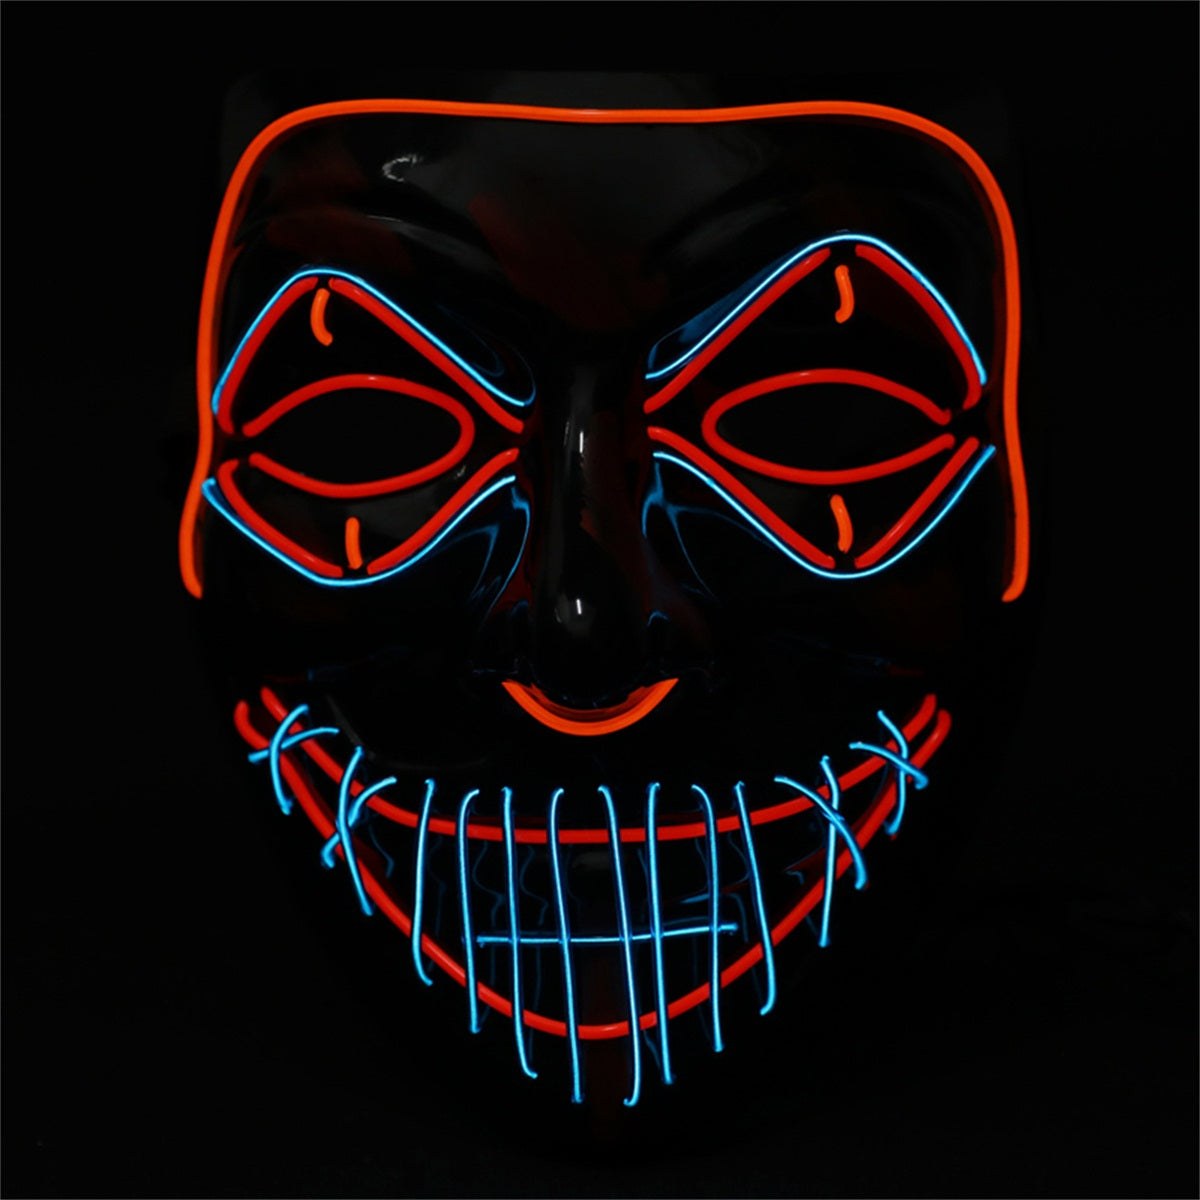 Purge Special LED Mask